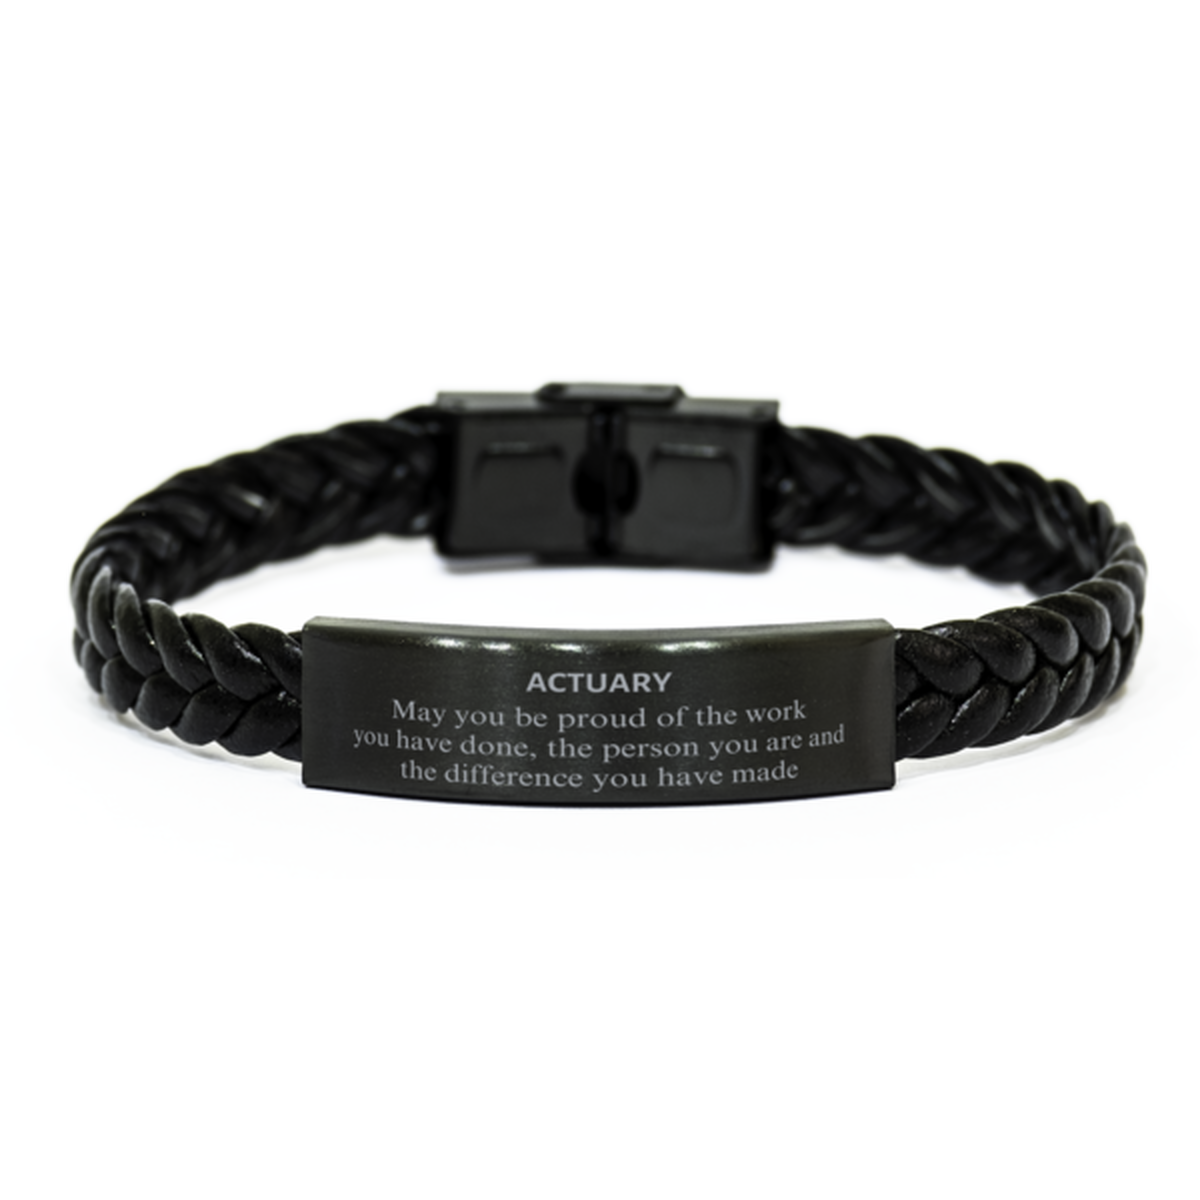 Actuary May you be proud of the work you have done, Retirement Actuary Braided Leather Bracelet for Colleague Appreciation Gifts Amazing for Actuary